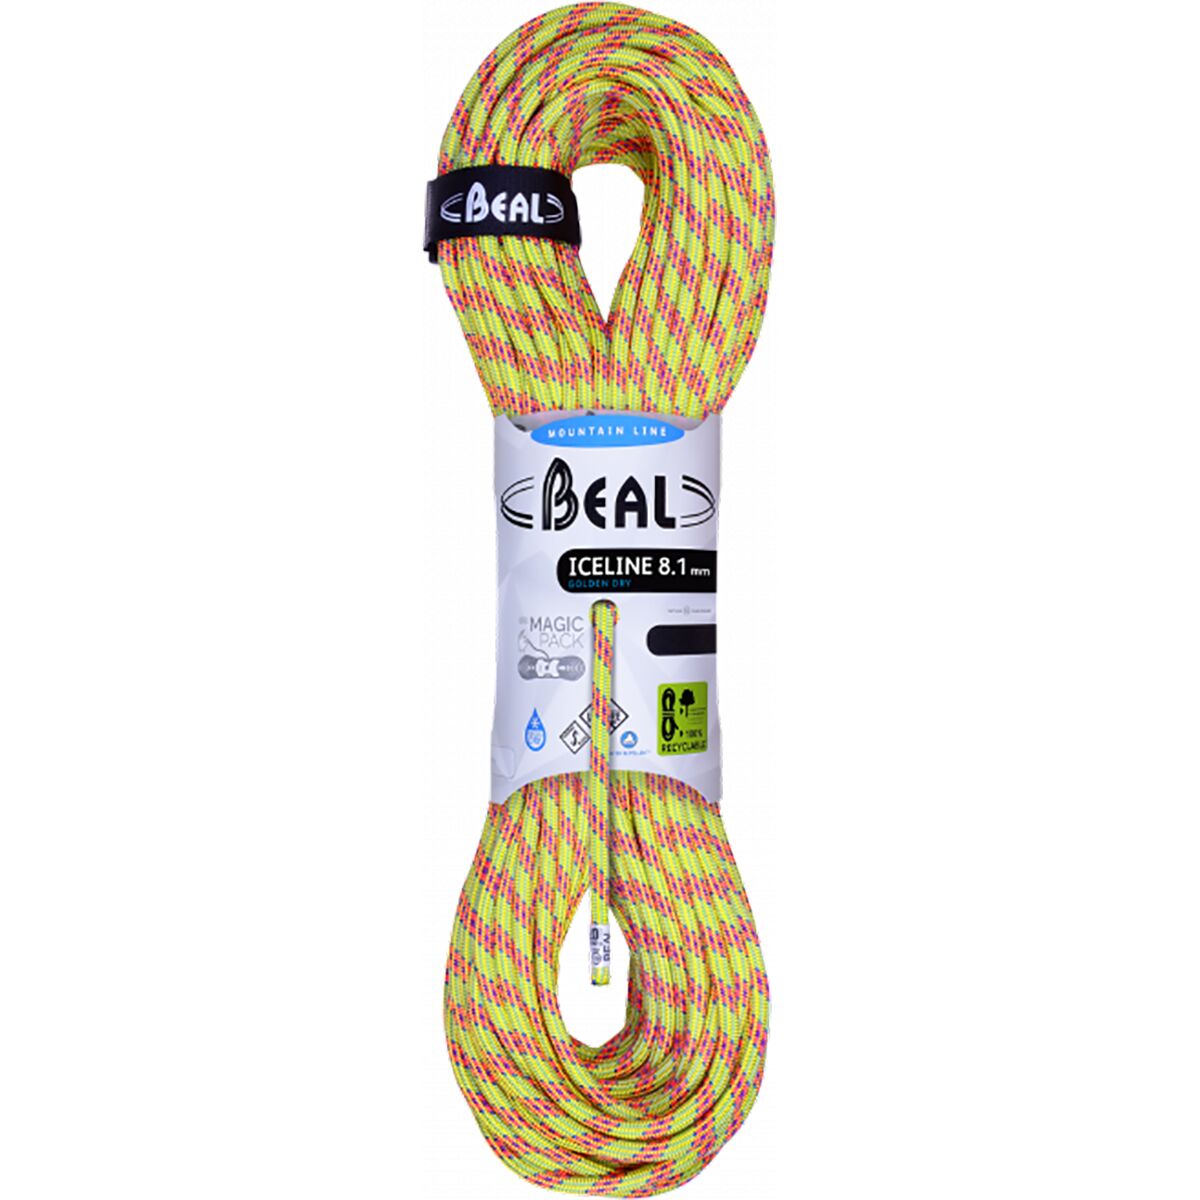 Beal Ice Line 8.1mm Rope